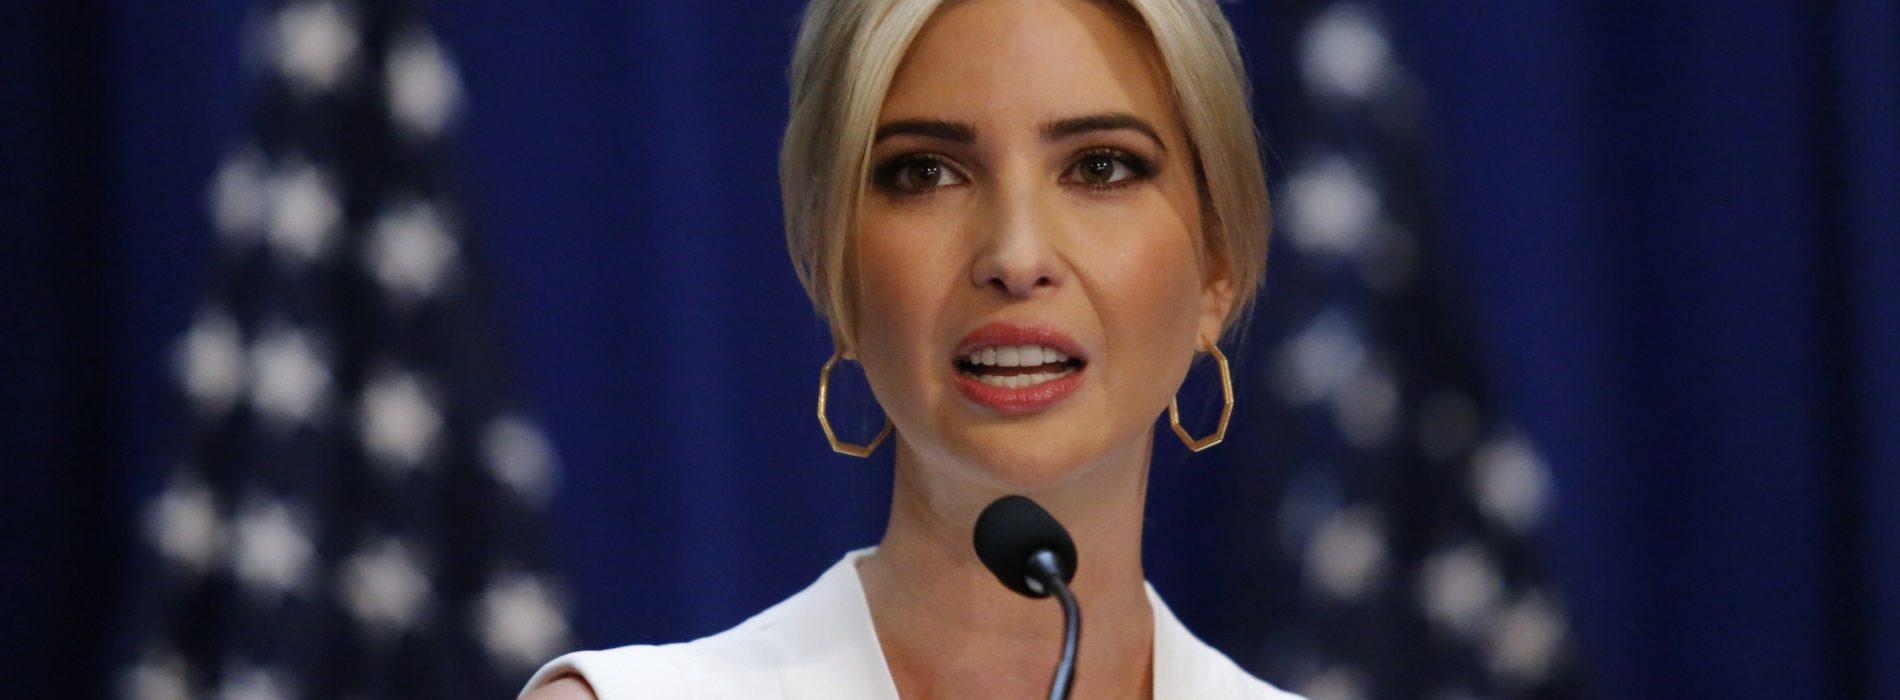 Liberal bullies have targeted Ivanka! Sign the petition telling Macy’s not to cave to radicals.